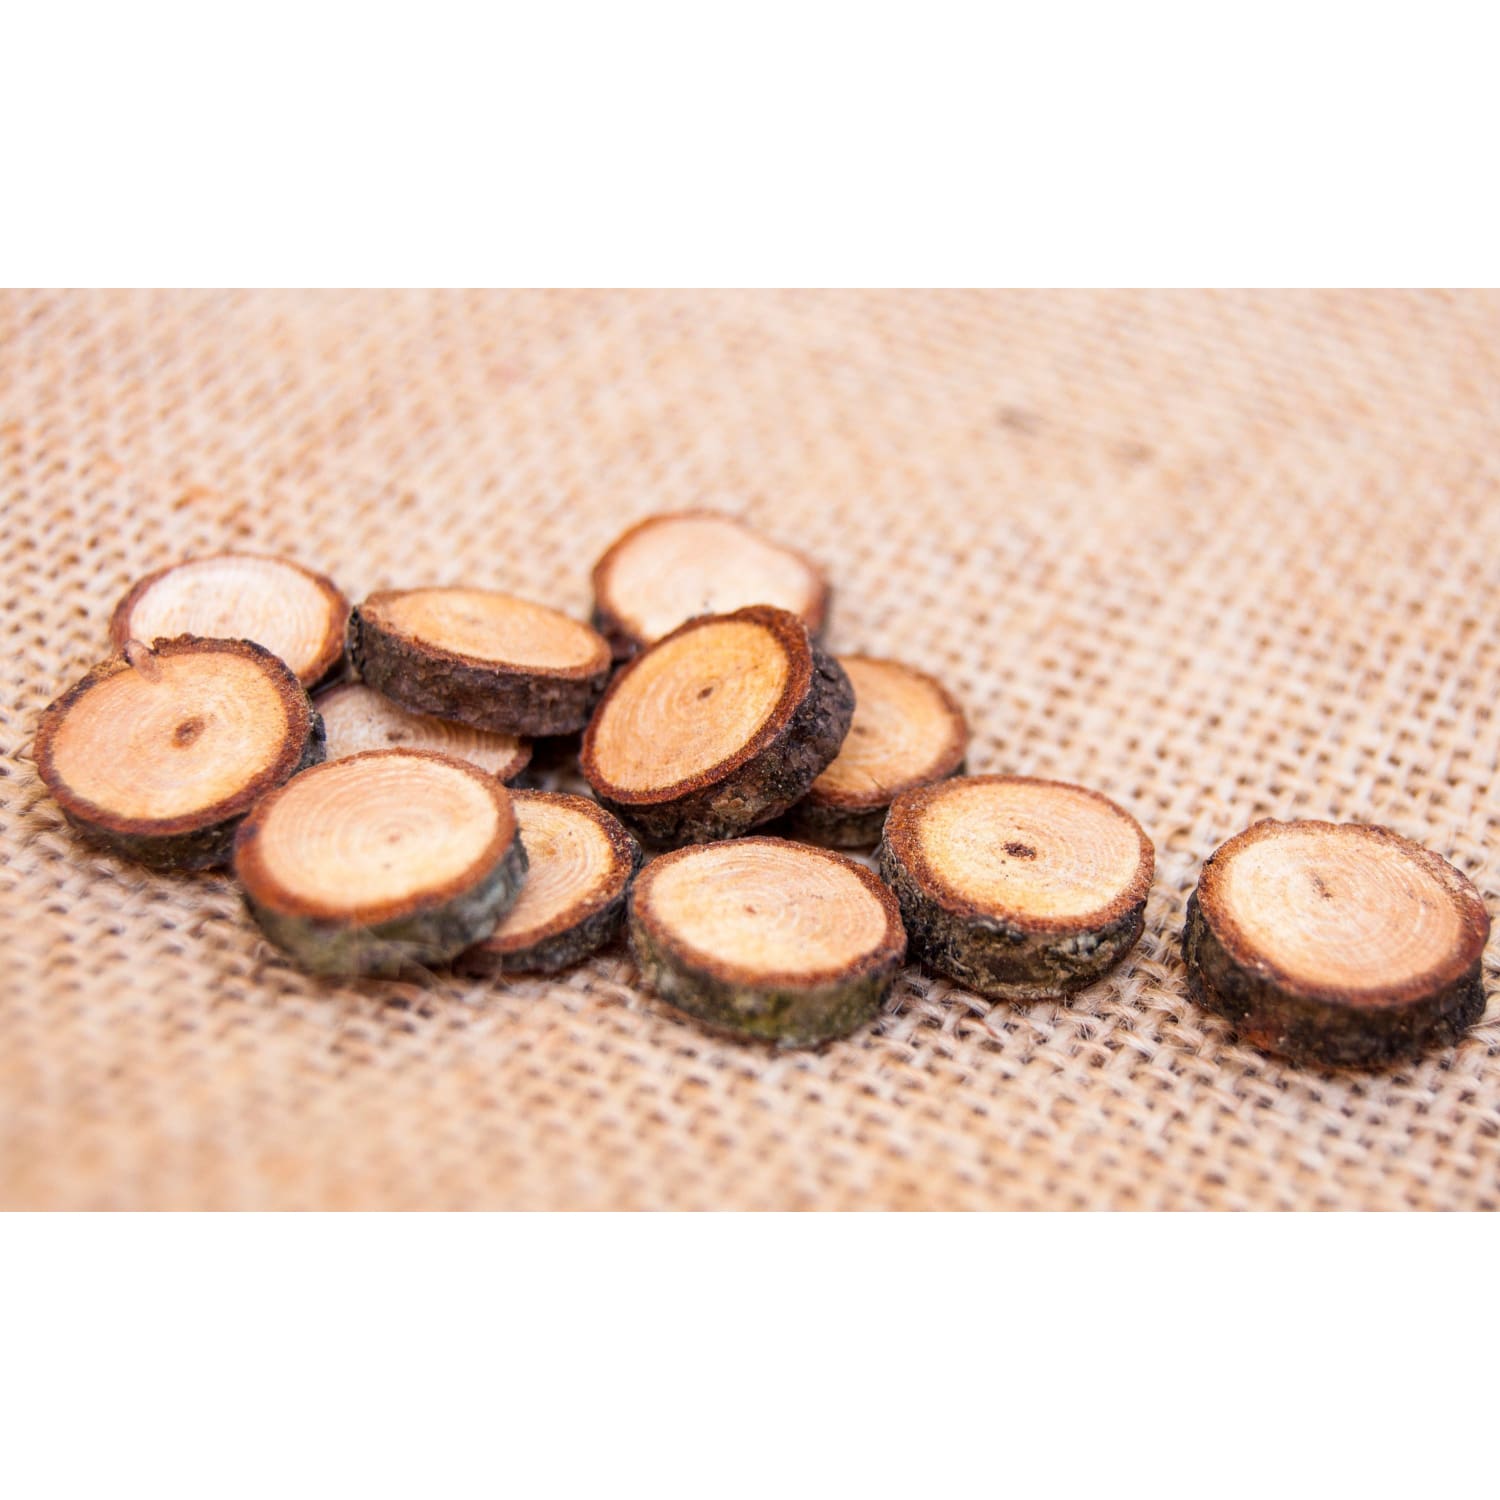 1 - 2 Cm Wood Slices (20 Pack) - Small Wood Slices